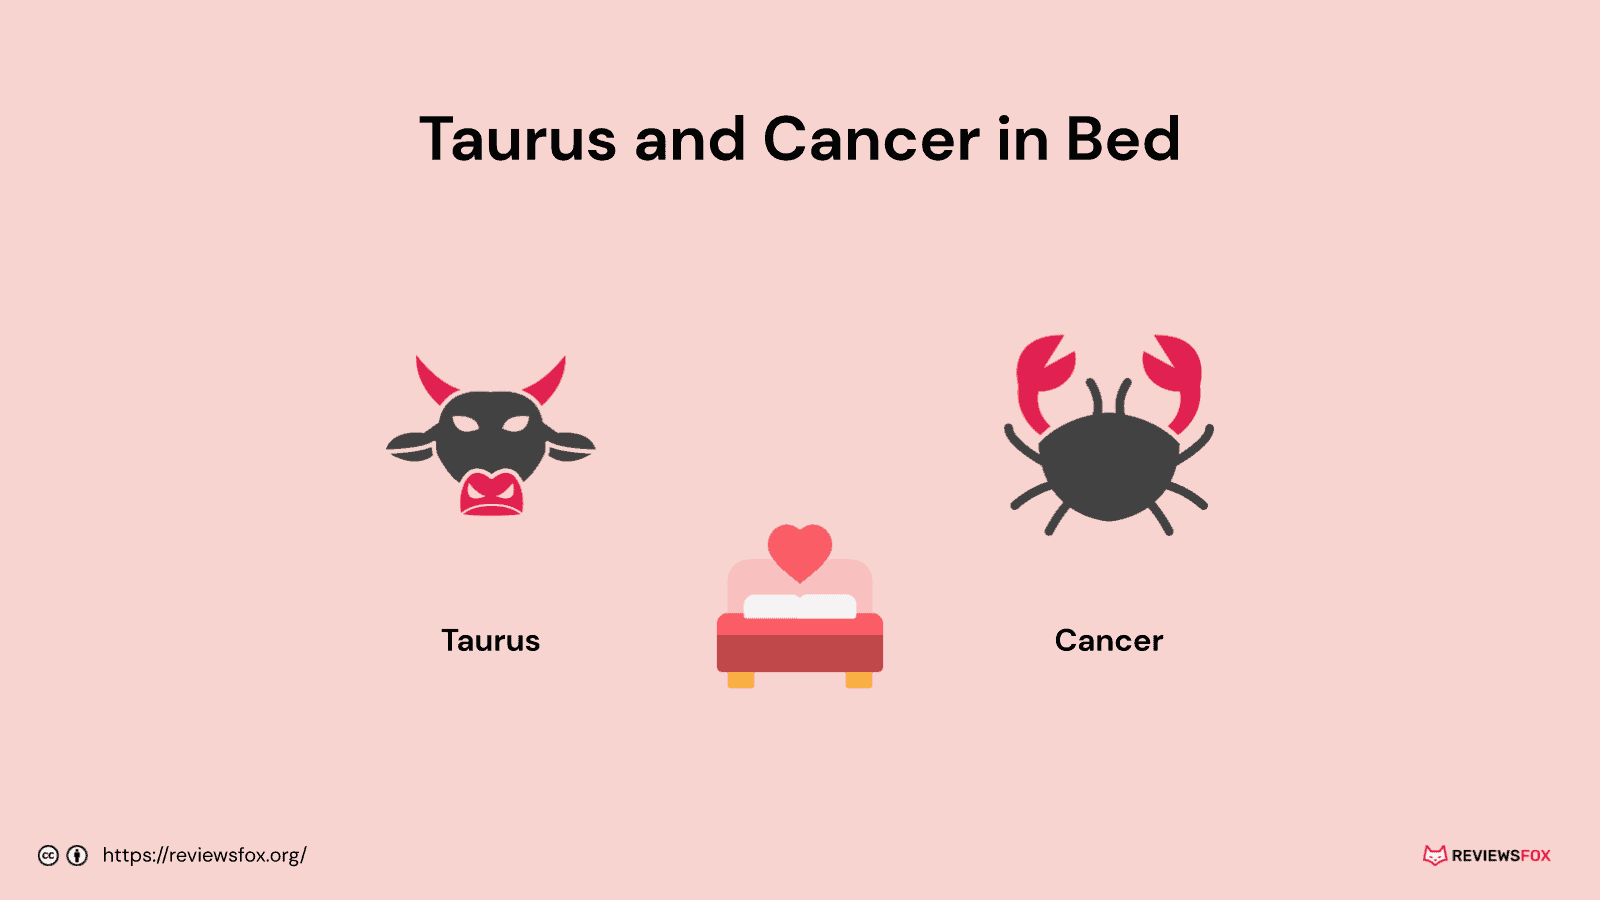 Taurus and Cancer in bed